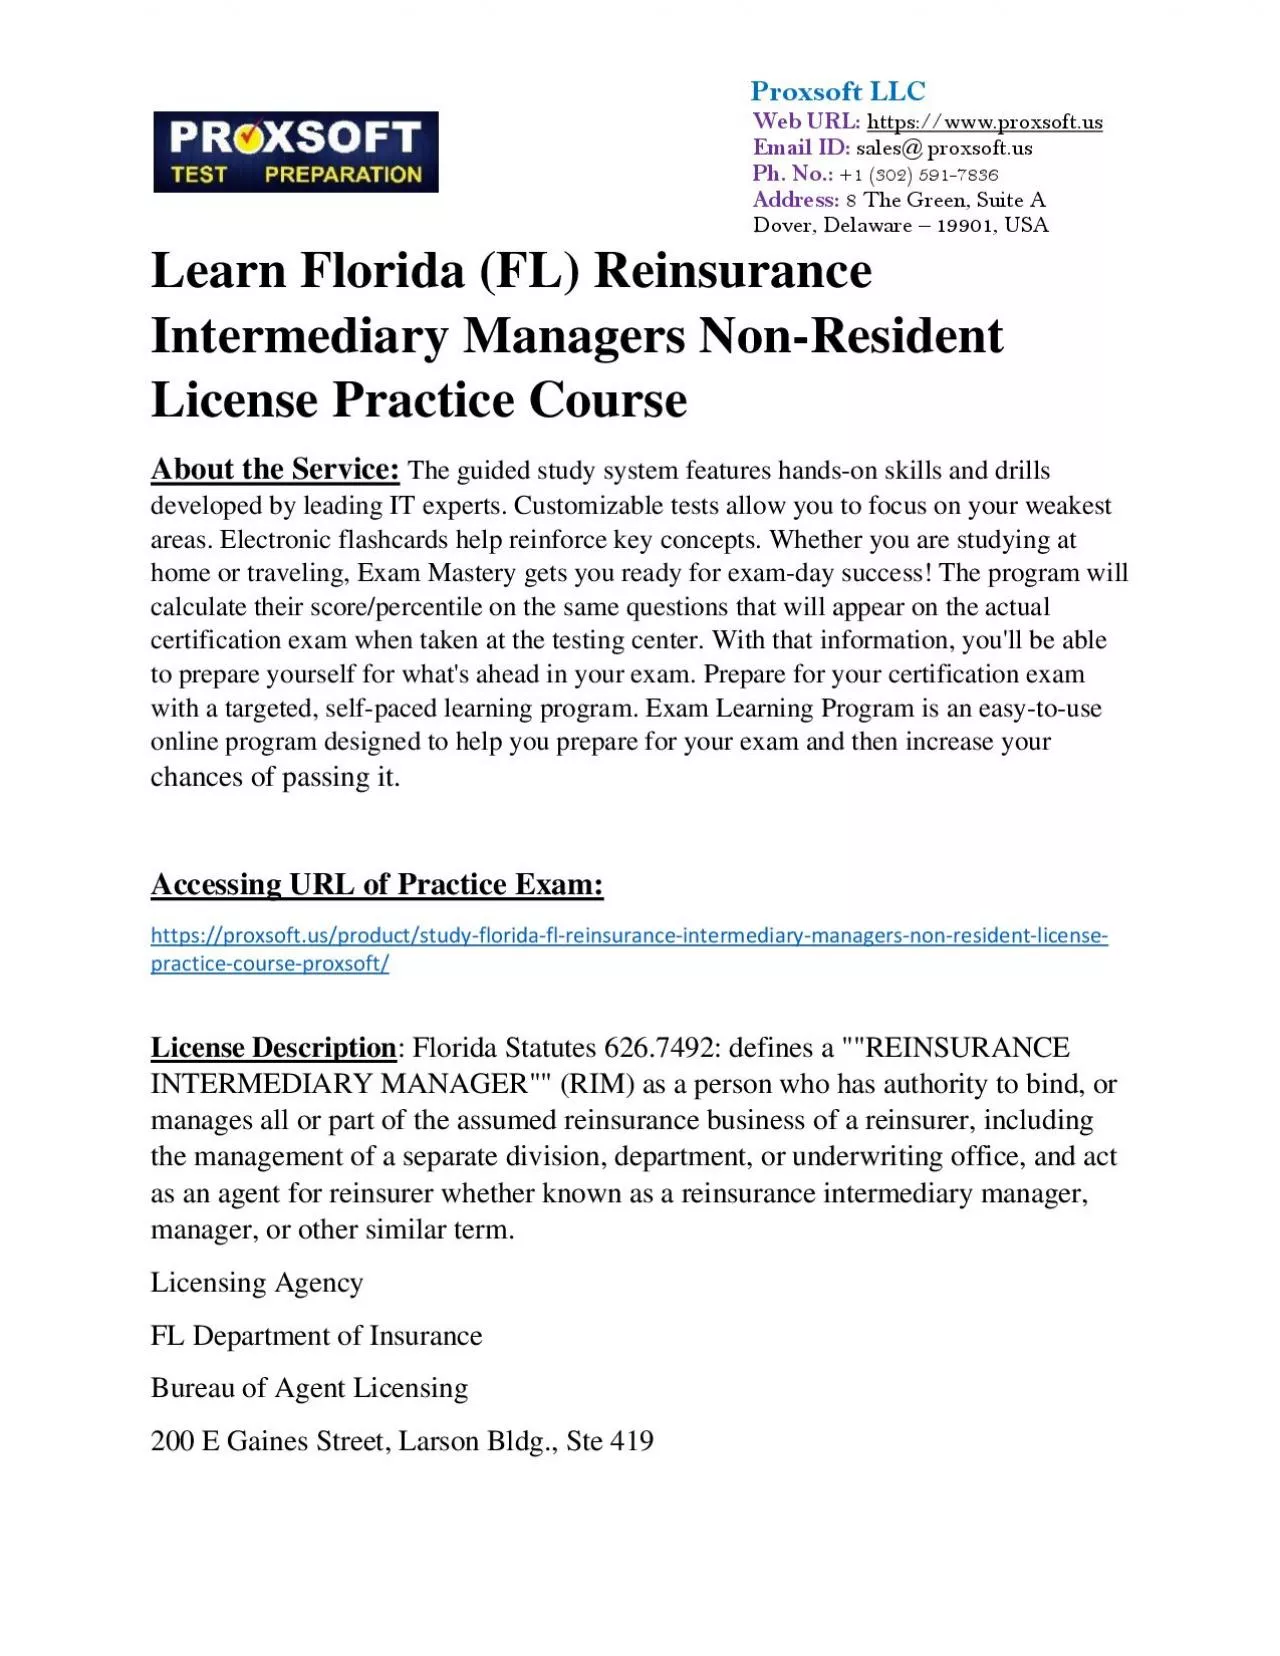 Learn Florida (FL) Reinsurance Intermediary Managers Non-Resident License Practice Course